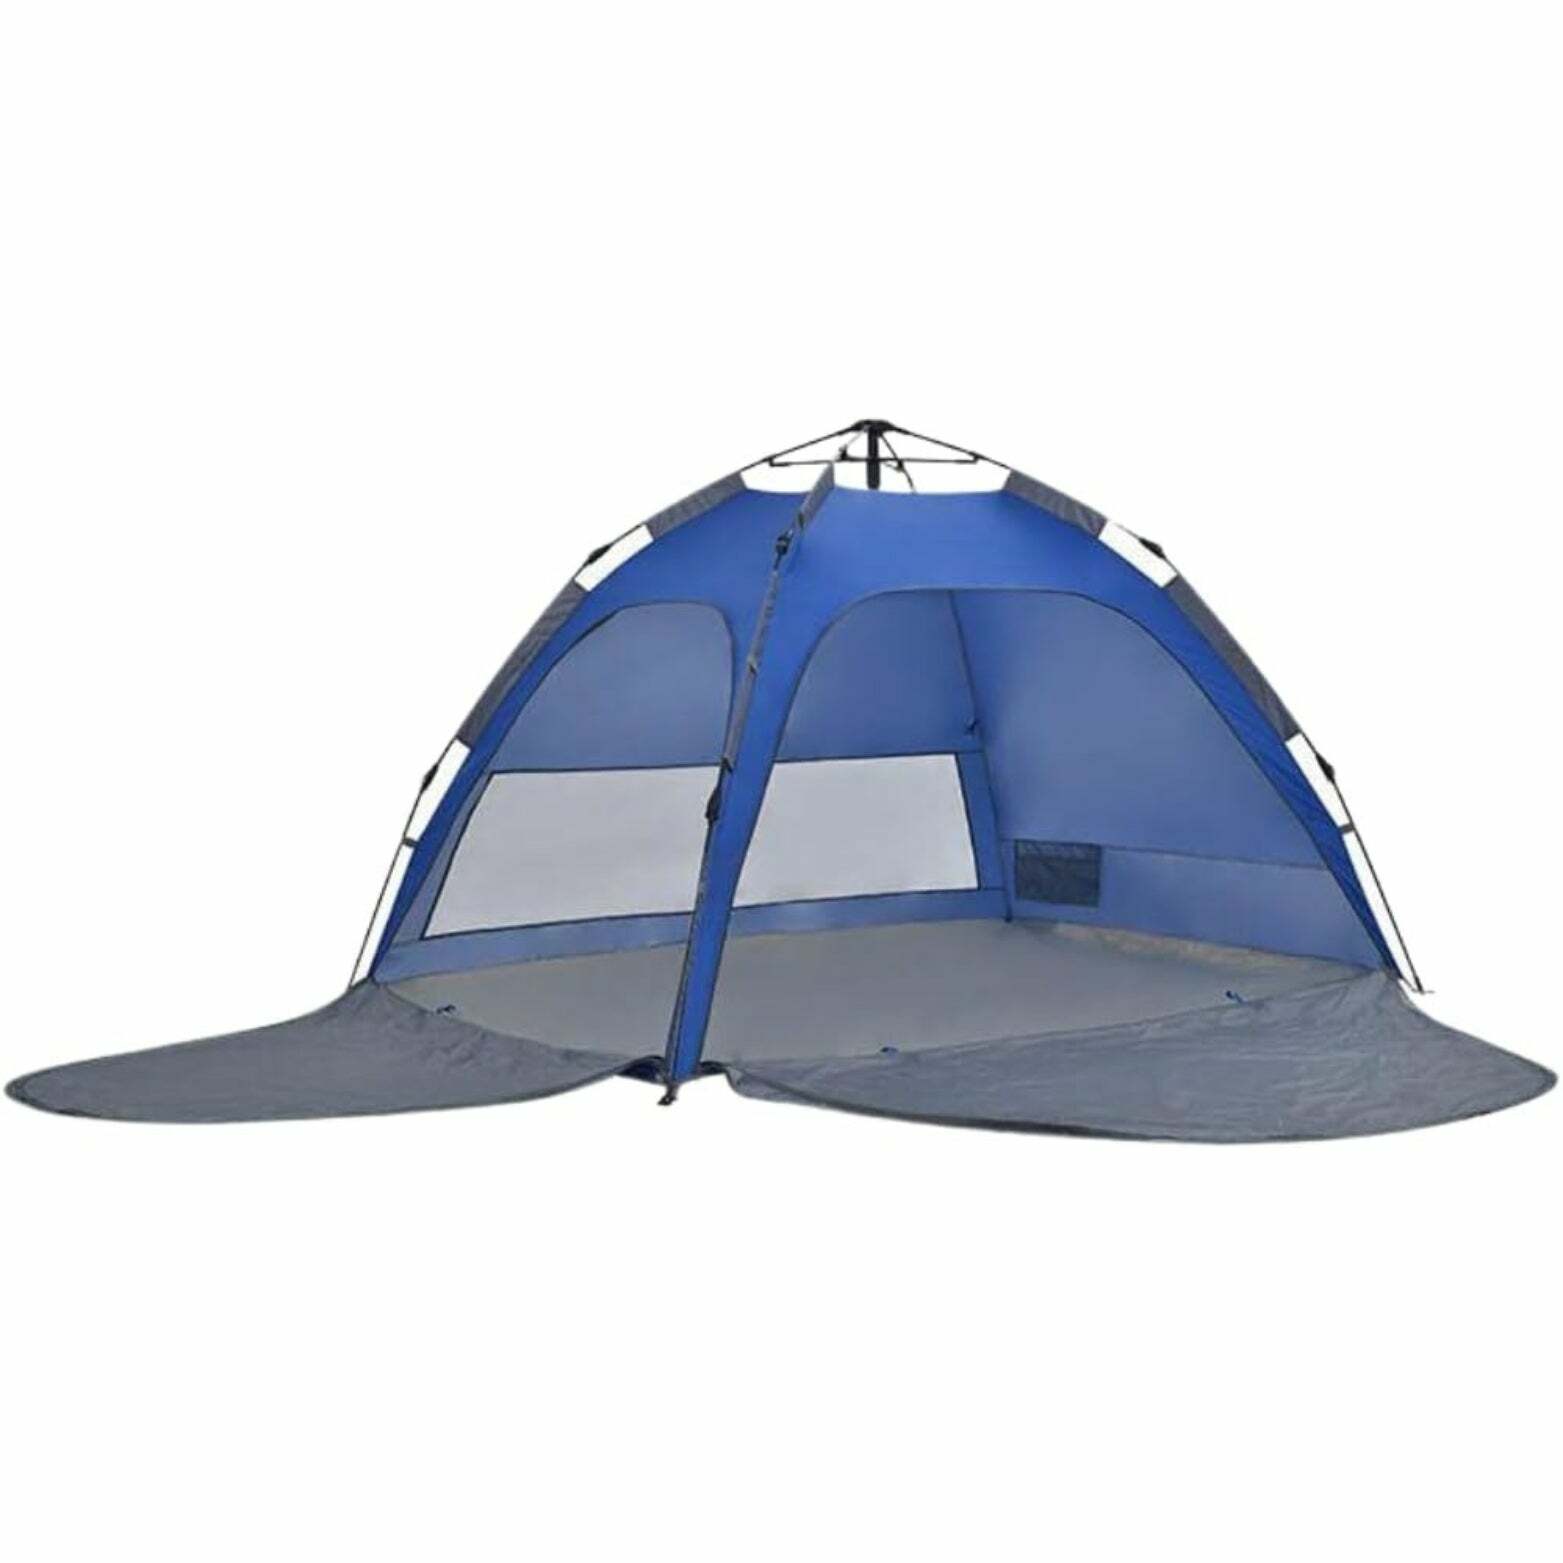 ROFFT 3-Person Instant Pop-Up Dome Tent - Water Resistant, Lightweight, with Extensible Porch and Dual Mesh Doors - Ideal for Camping, Backpacking, Beach - Blue